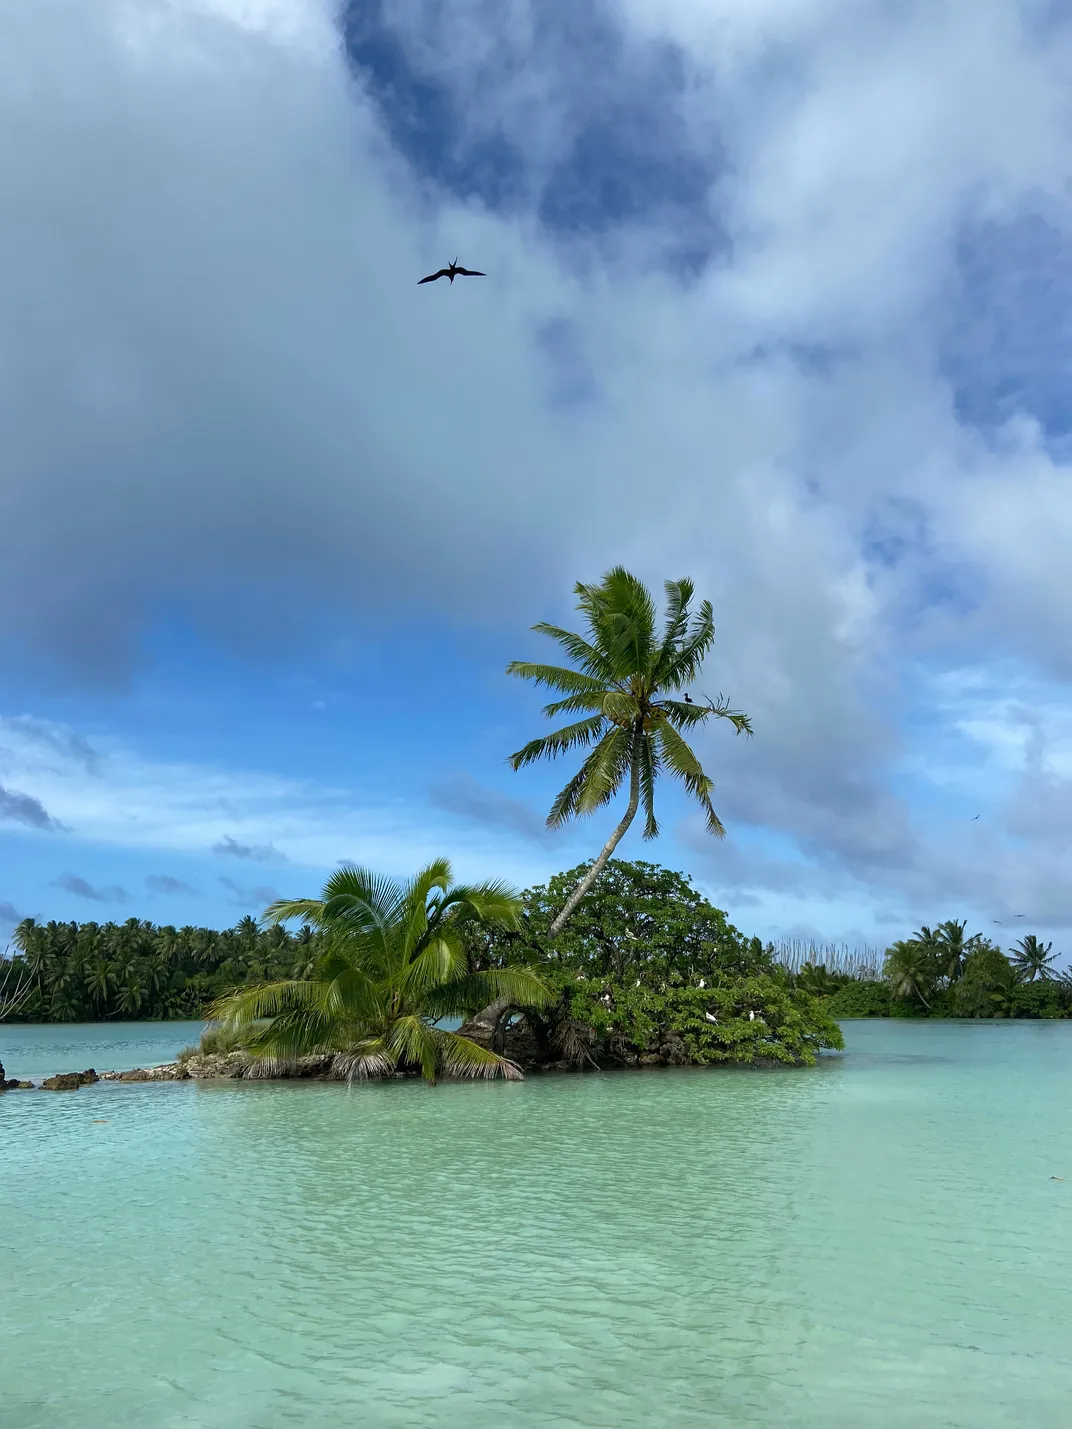 small island in the middle of an ocean, one tall palm tree surrounded by other smaller trees.